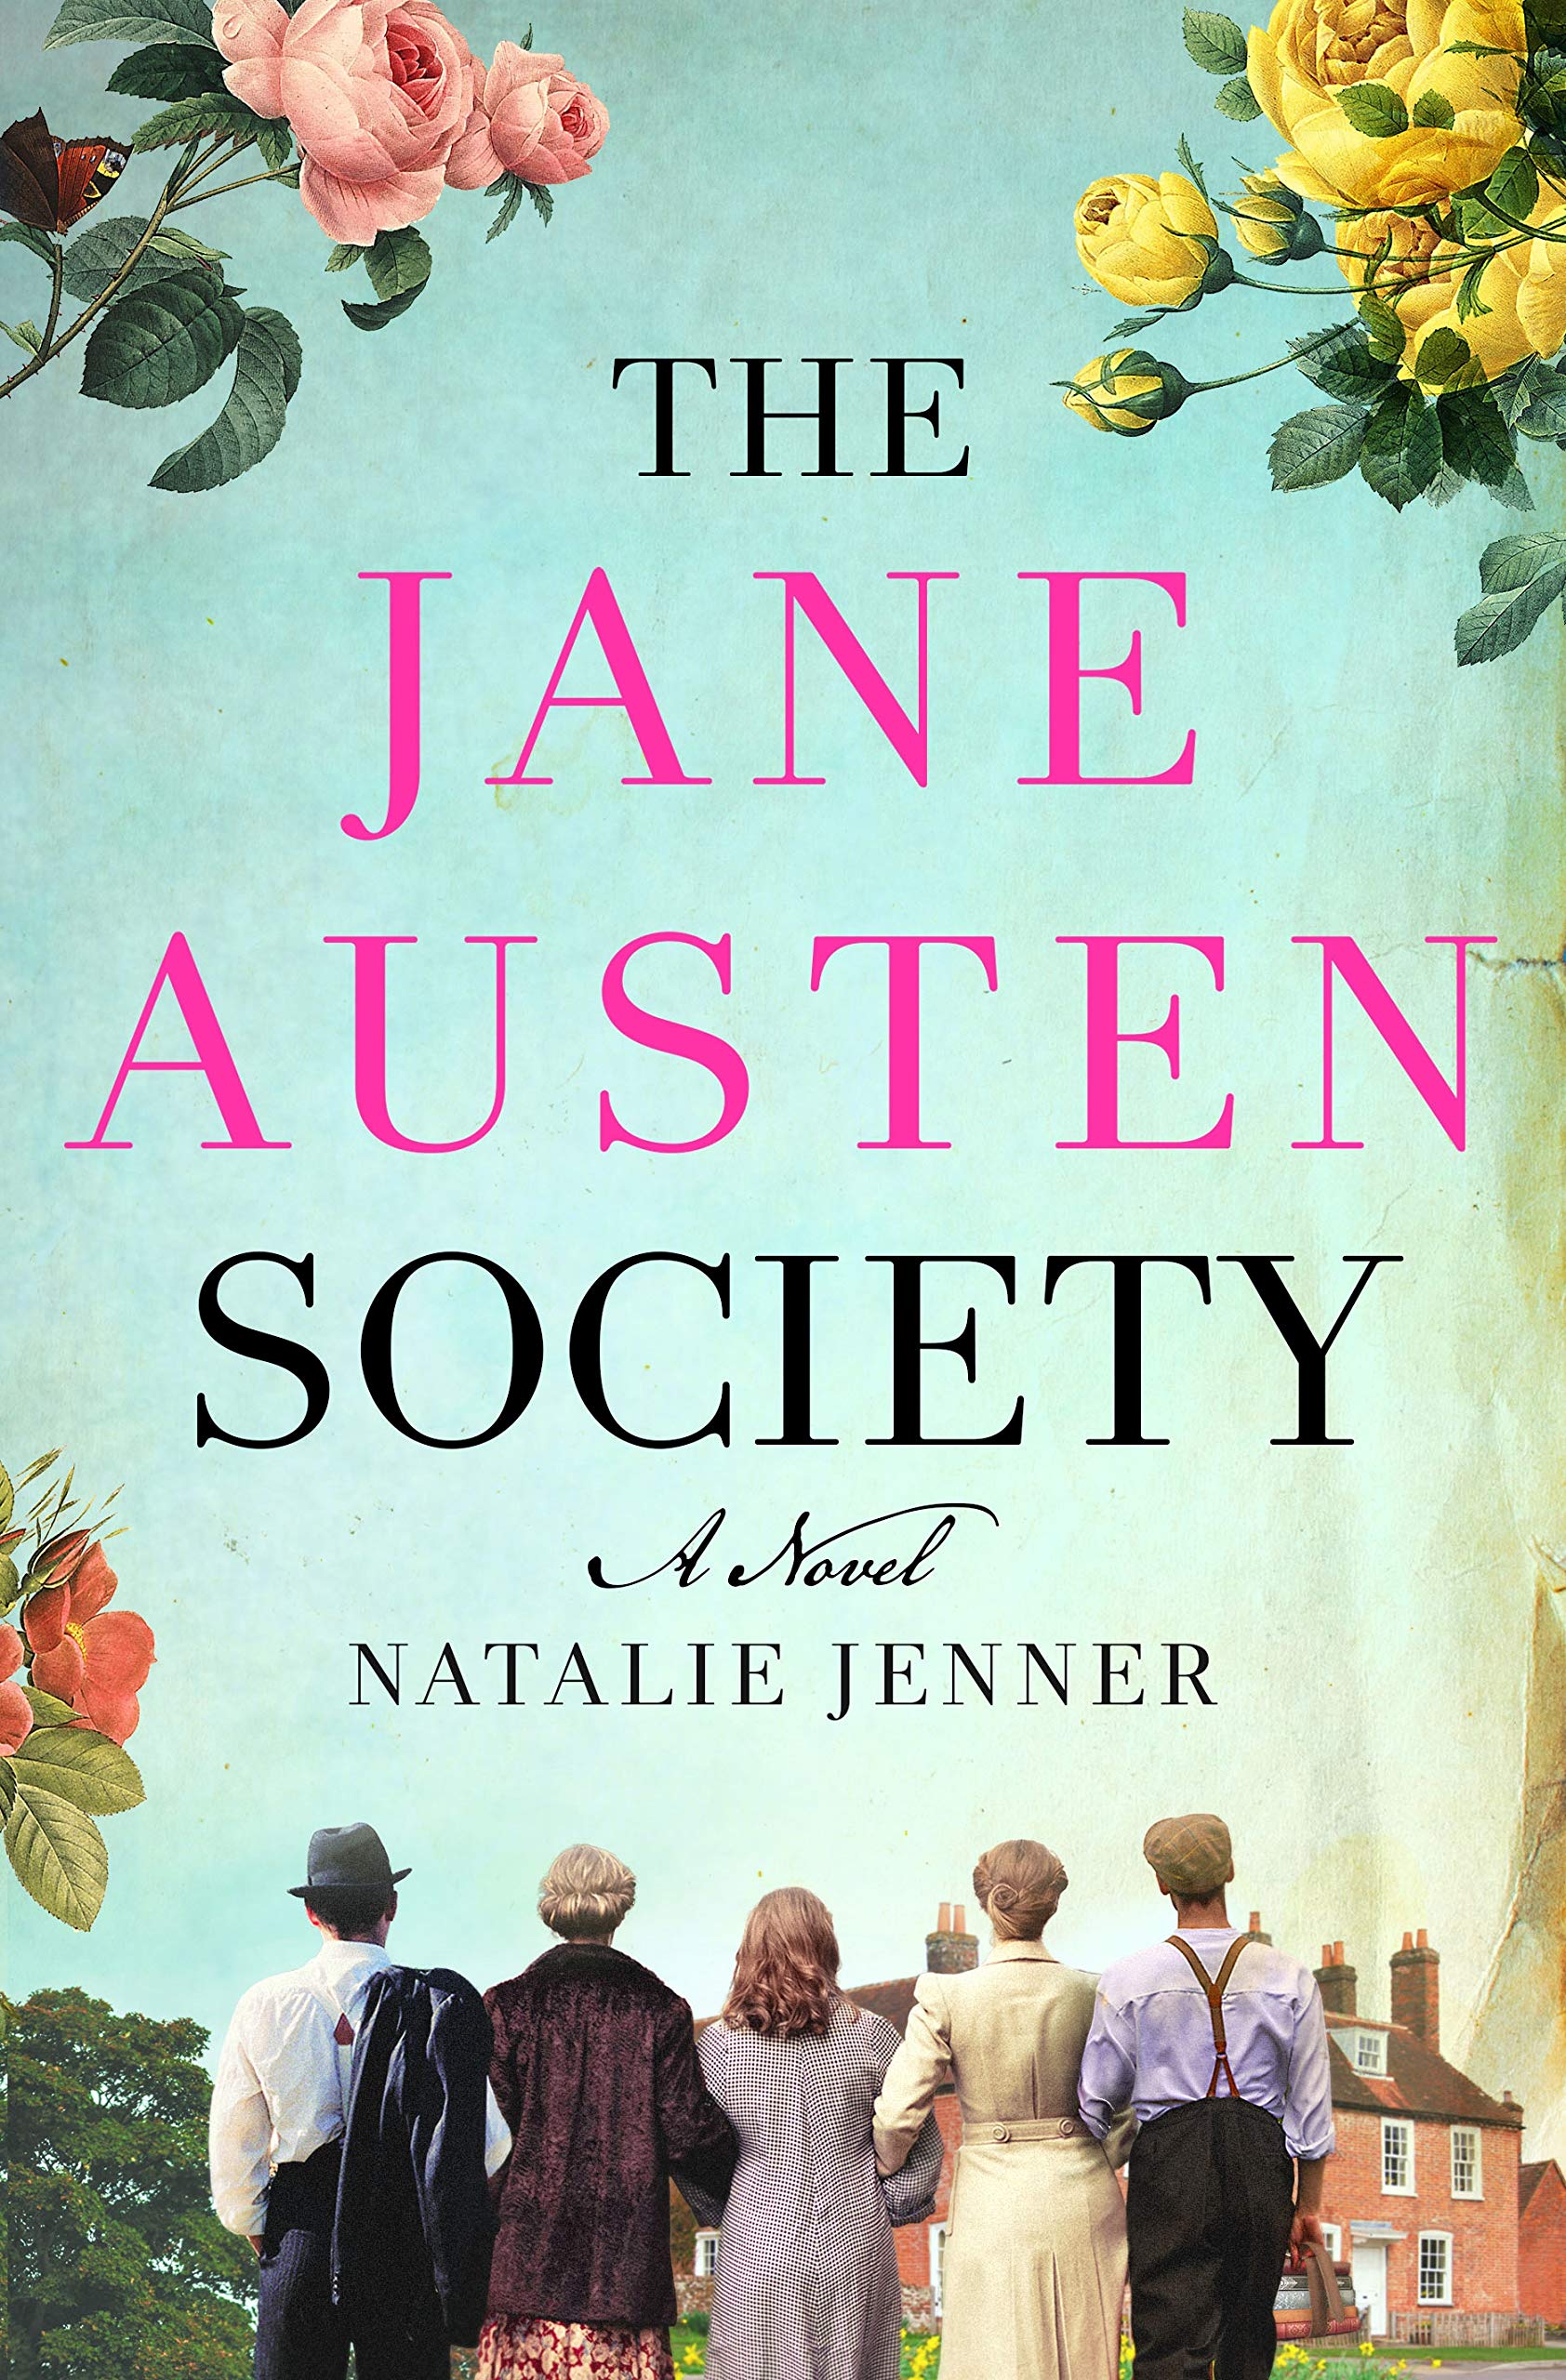 Cover Image for "The Jane Austen Society" 